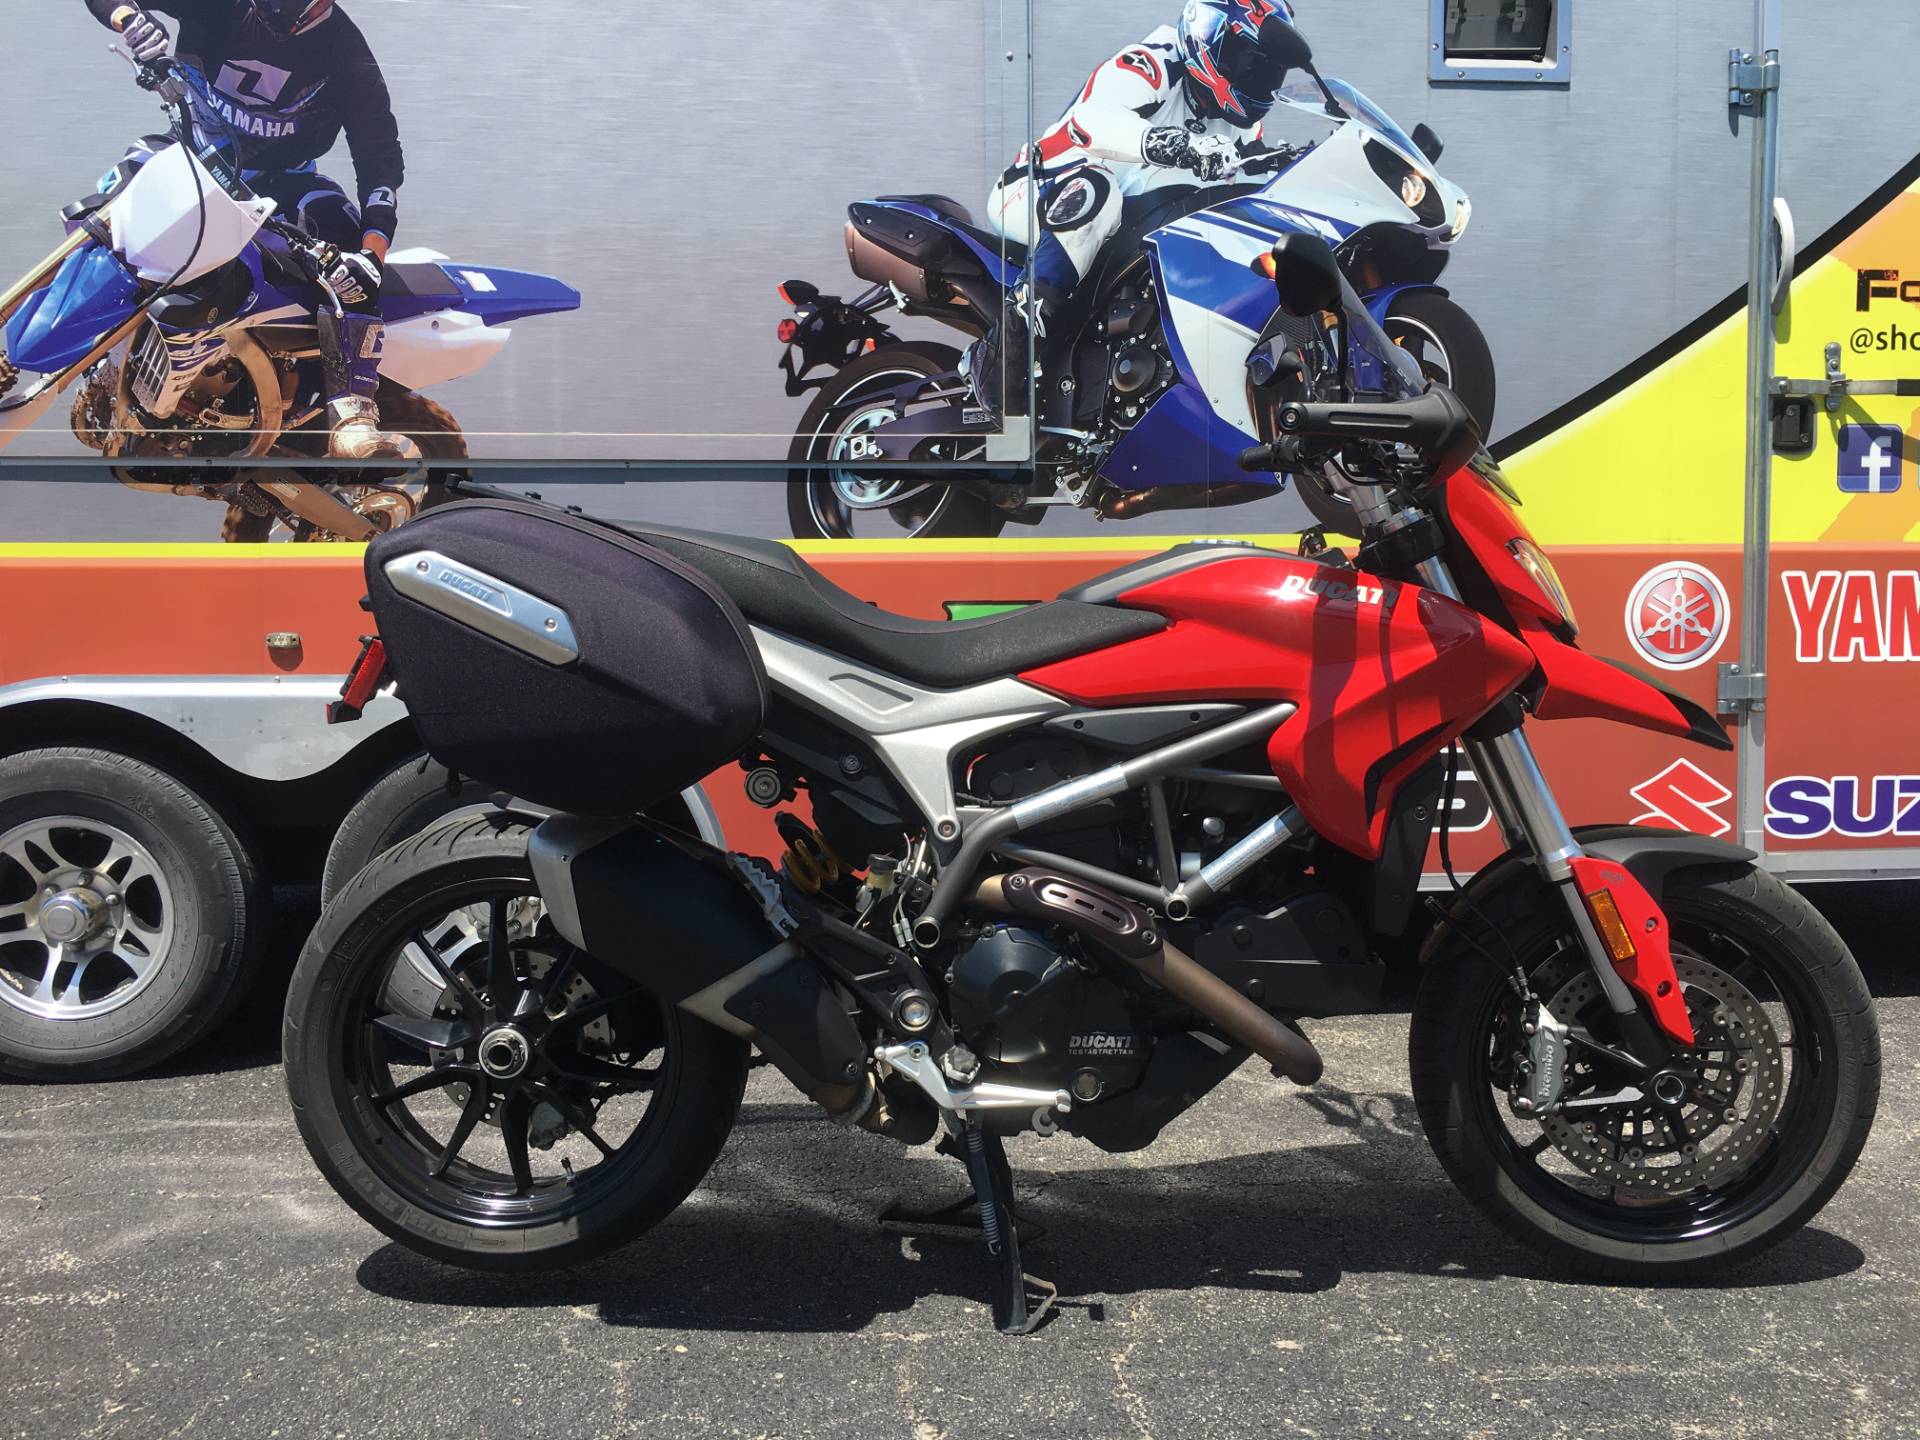 Used 2013 Ducati Hyperstrada Motorcycles In Belvidere Il